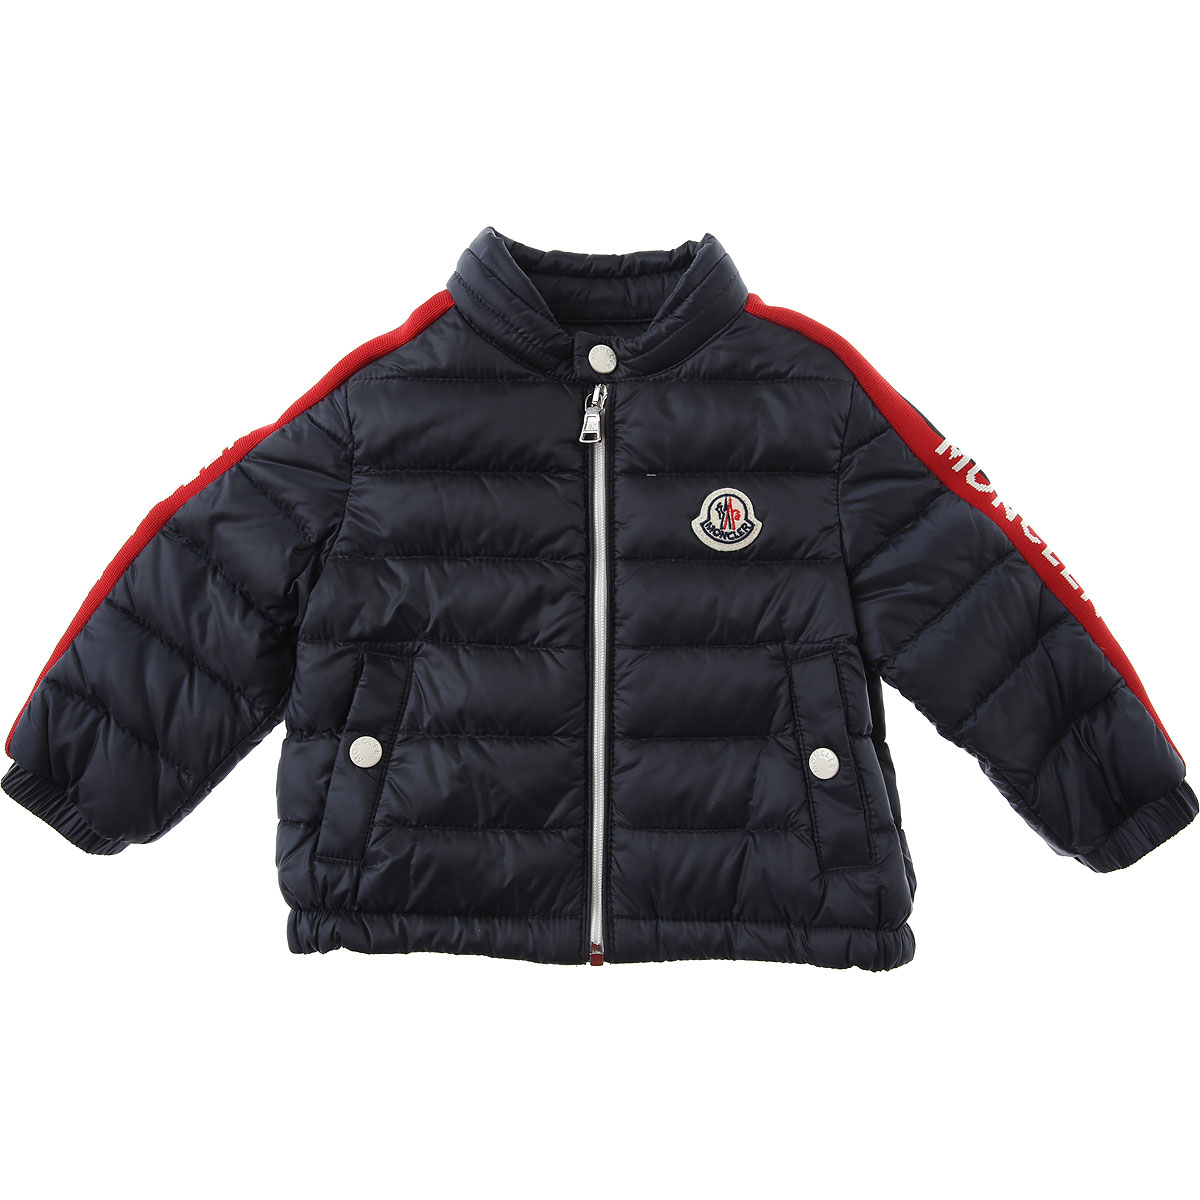 Baby Boy Clothing Moncler, Style code: 4090599-53048-778